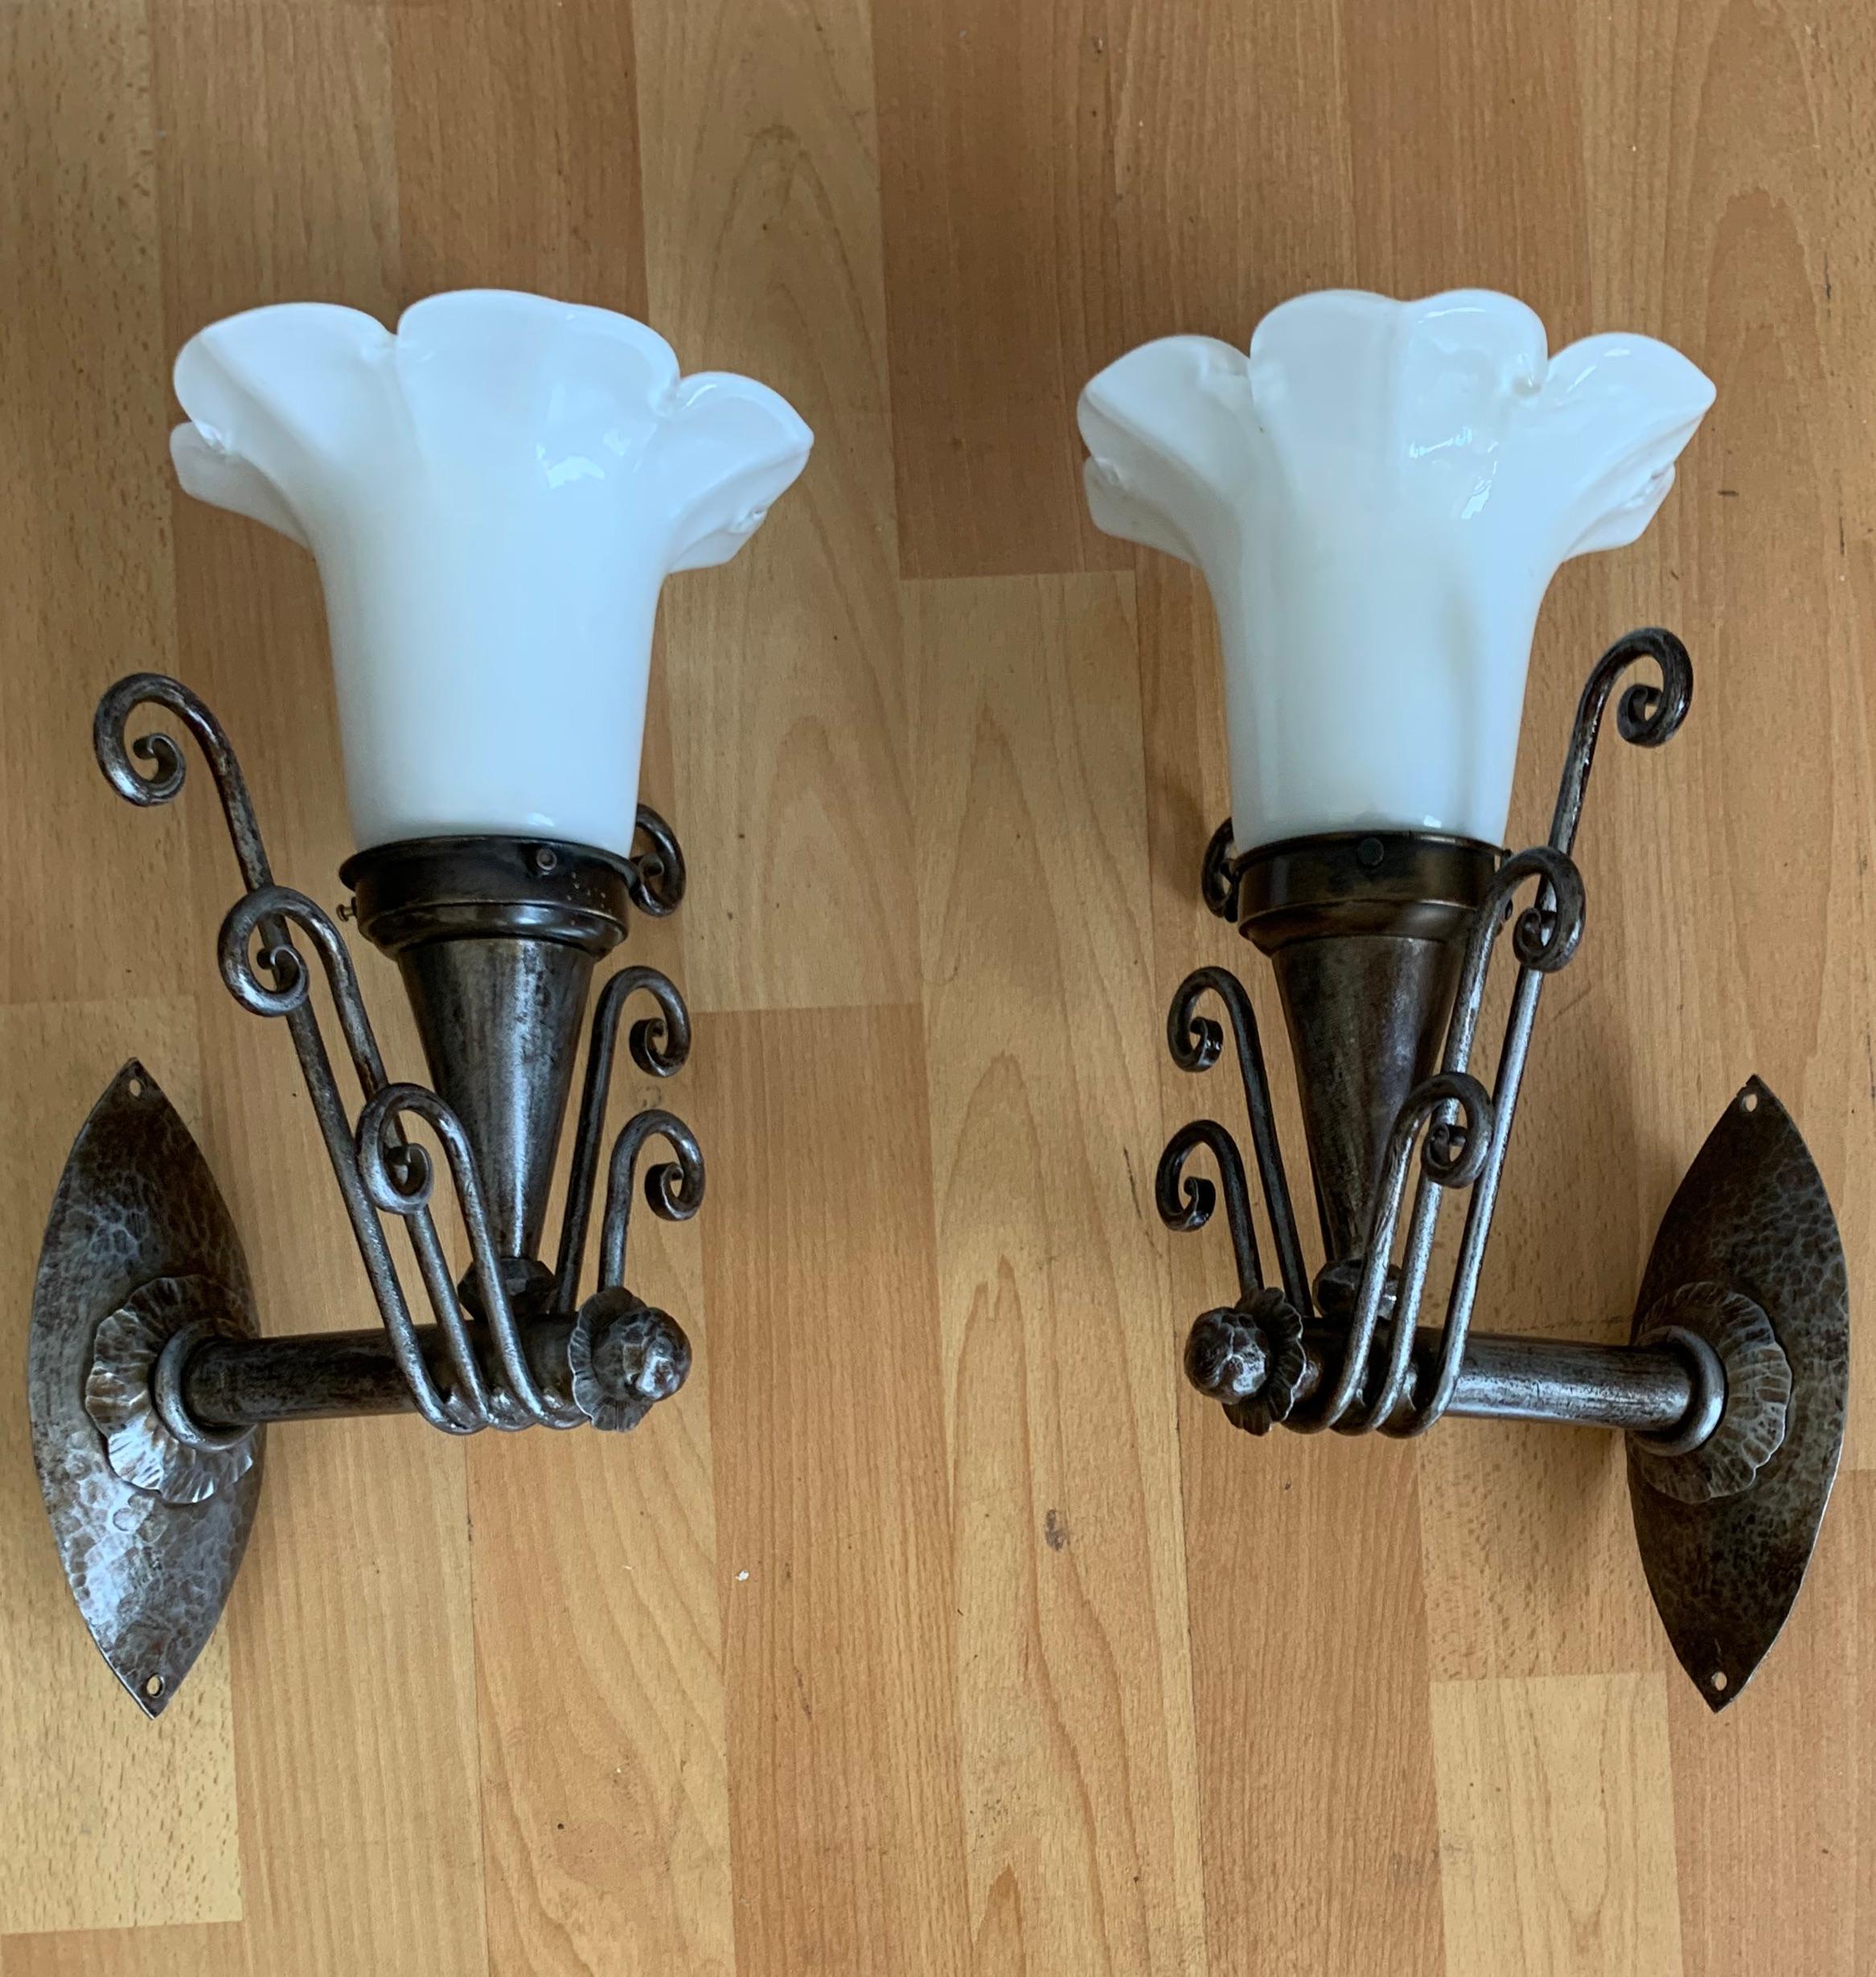 Wonderfully stylish and all handcrafted wall lights from the Arts & Crafts era.

If you are looking for a unique pair of quality crafted and highly decorative wall sconces then these hand forged iron and mouth blown glass sconces could be perfect.